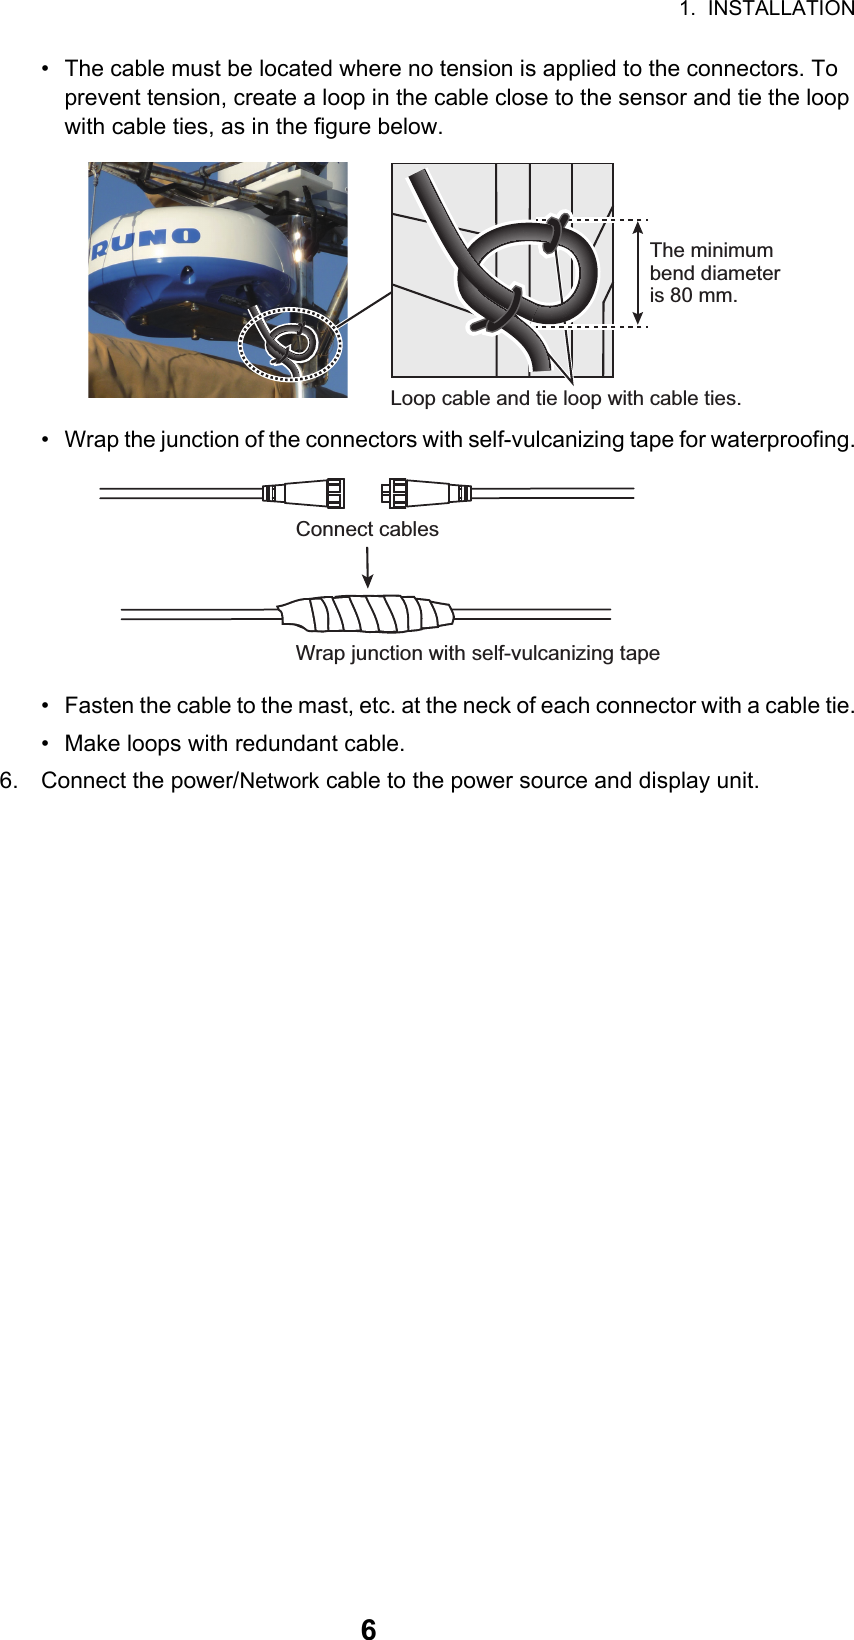 1.  INSTALLATION6•  The cable must be located where no tension is applied to the connectors. To prevent tension, create a loop in the cable close to the sensor and tie the loop with cable ties, as in the figure below.•  Wrap the junction of the connectors with self-vulcanizing tape for waterproofing.•  Fasten the cable to the mast, etc. at the neck of each connector with a cable tie.•  Make loops with redundant cable.6. Connect the power/Network cable to the power source and display unit.Loop cable and tie loop with cable ties.The minimum bend diameter is 80 mm.Wrap junction with self-vulcanizing tapeConnect cables